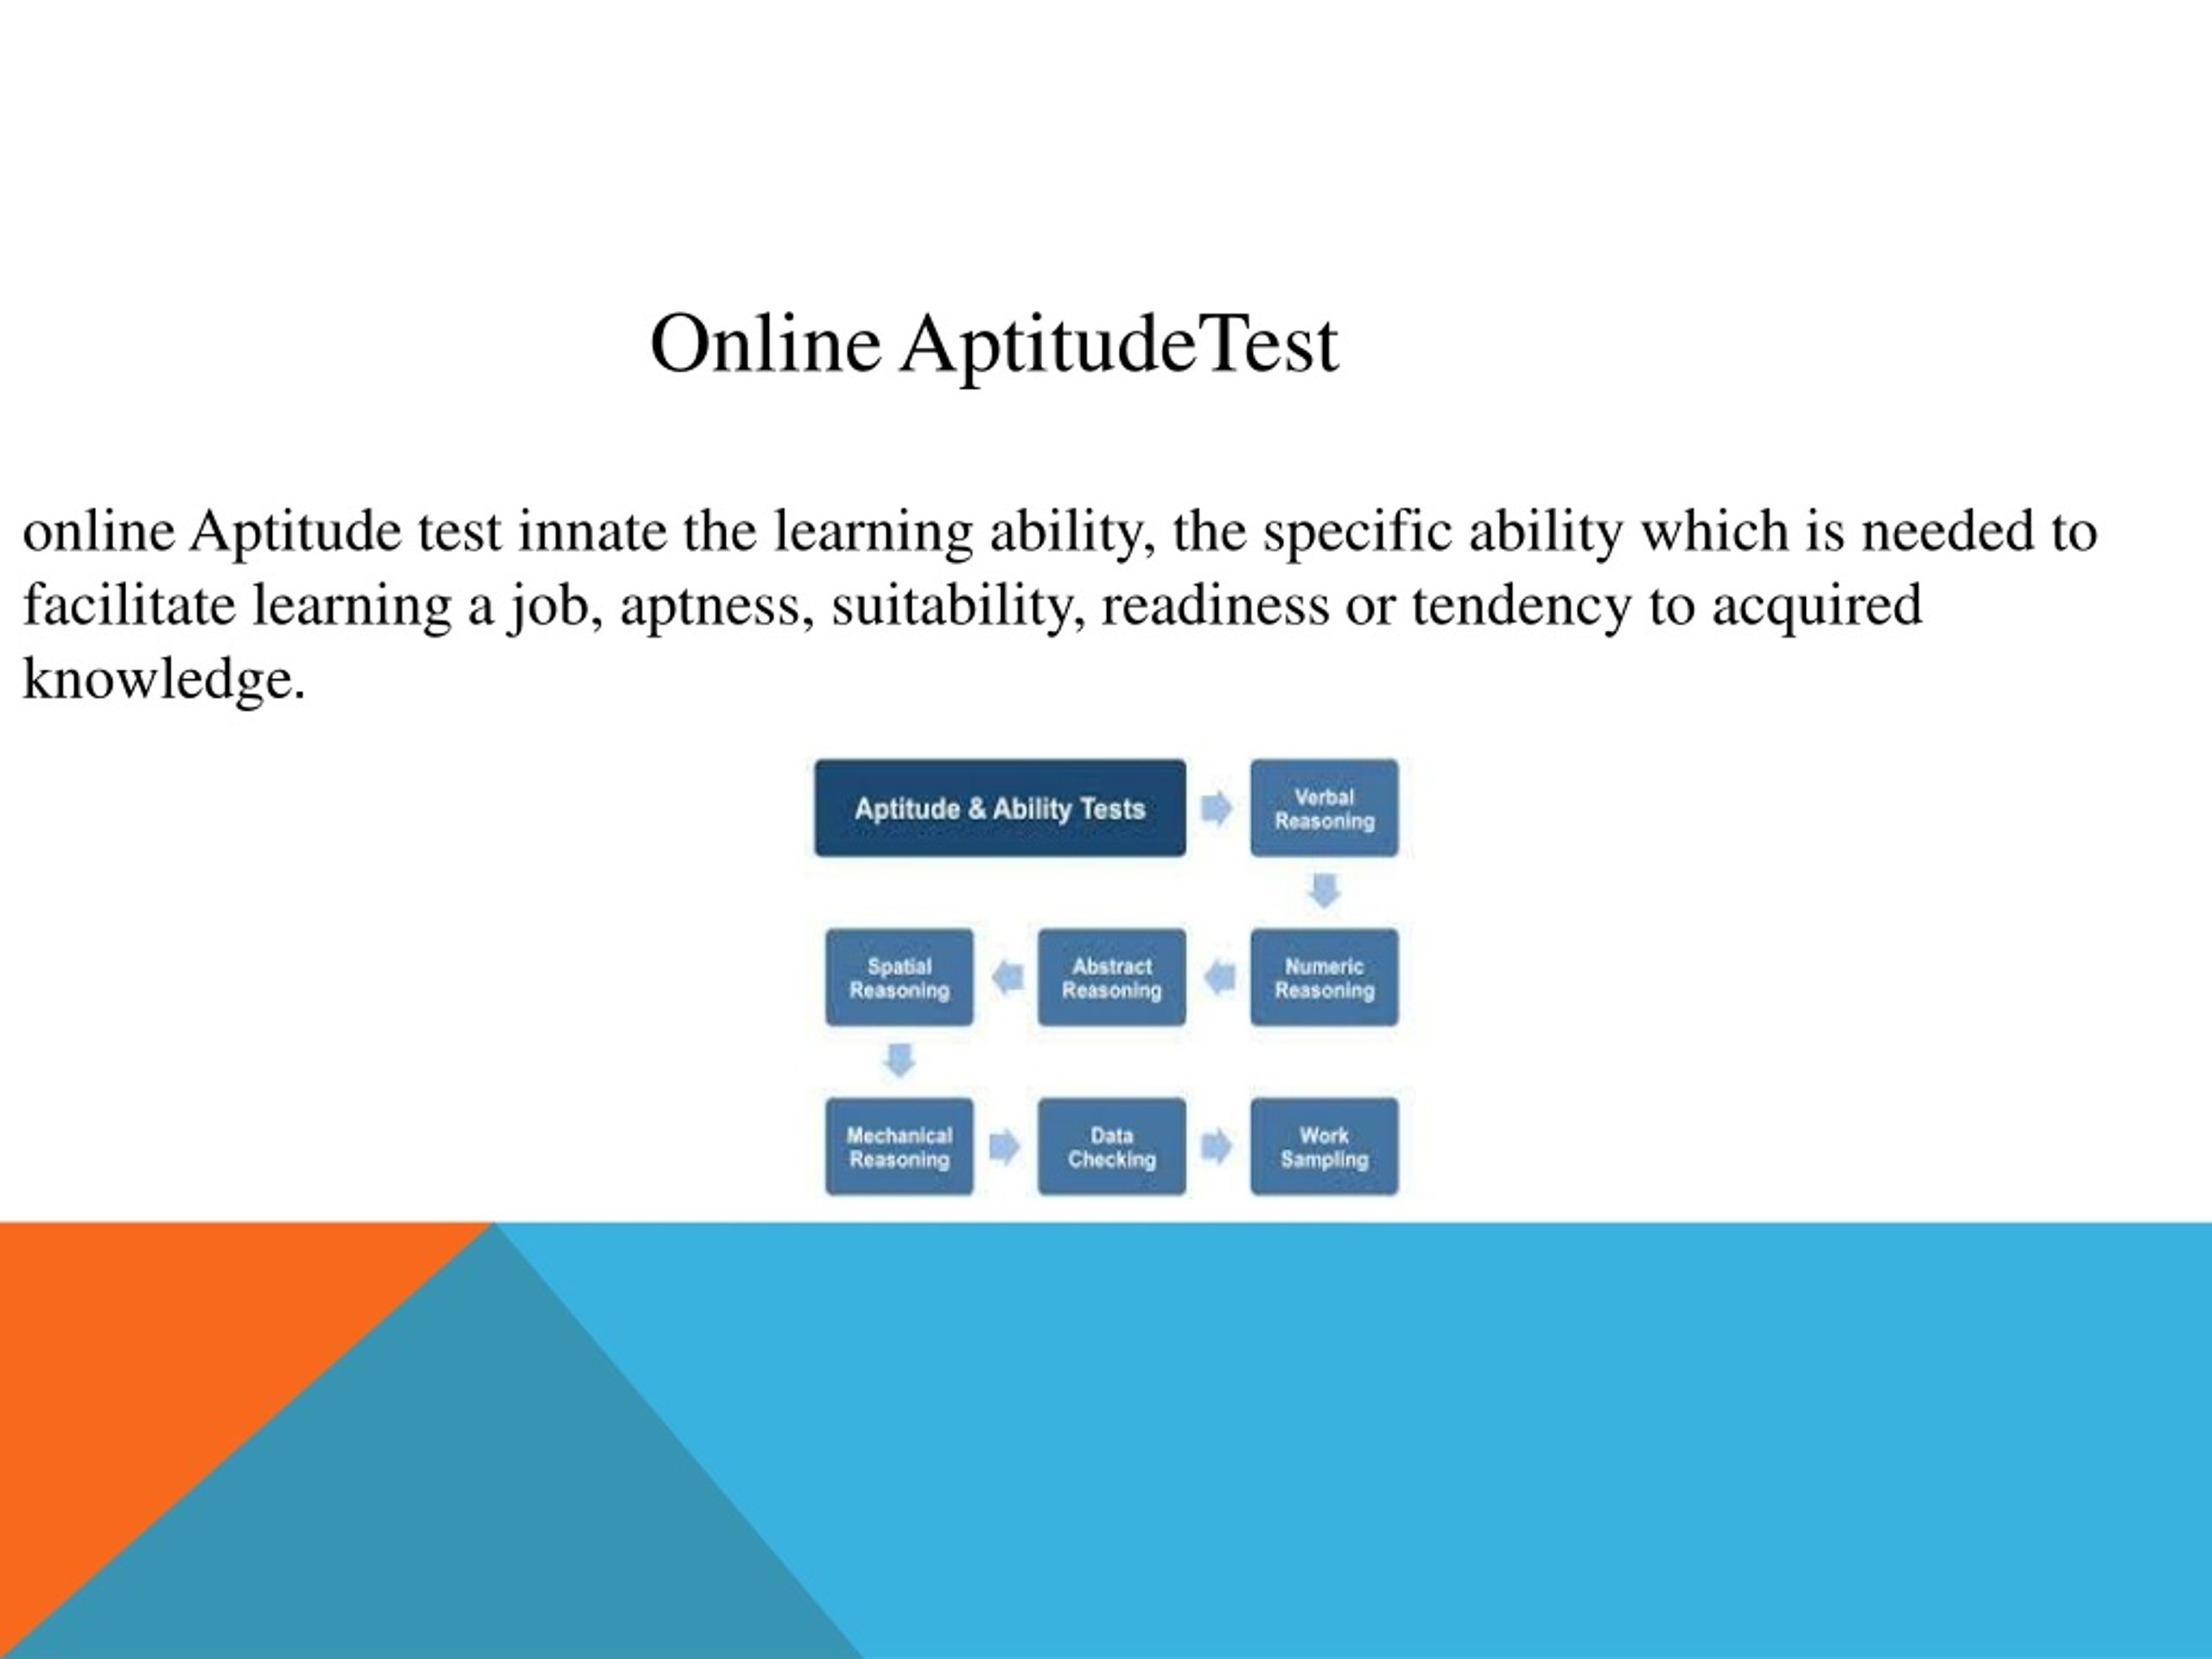 free-practice-aptitude-test-questions-answers-2021